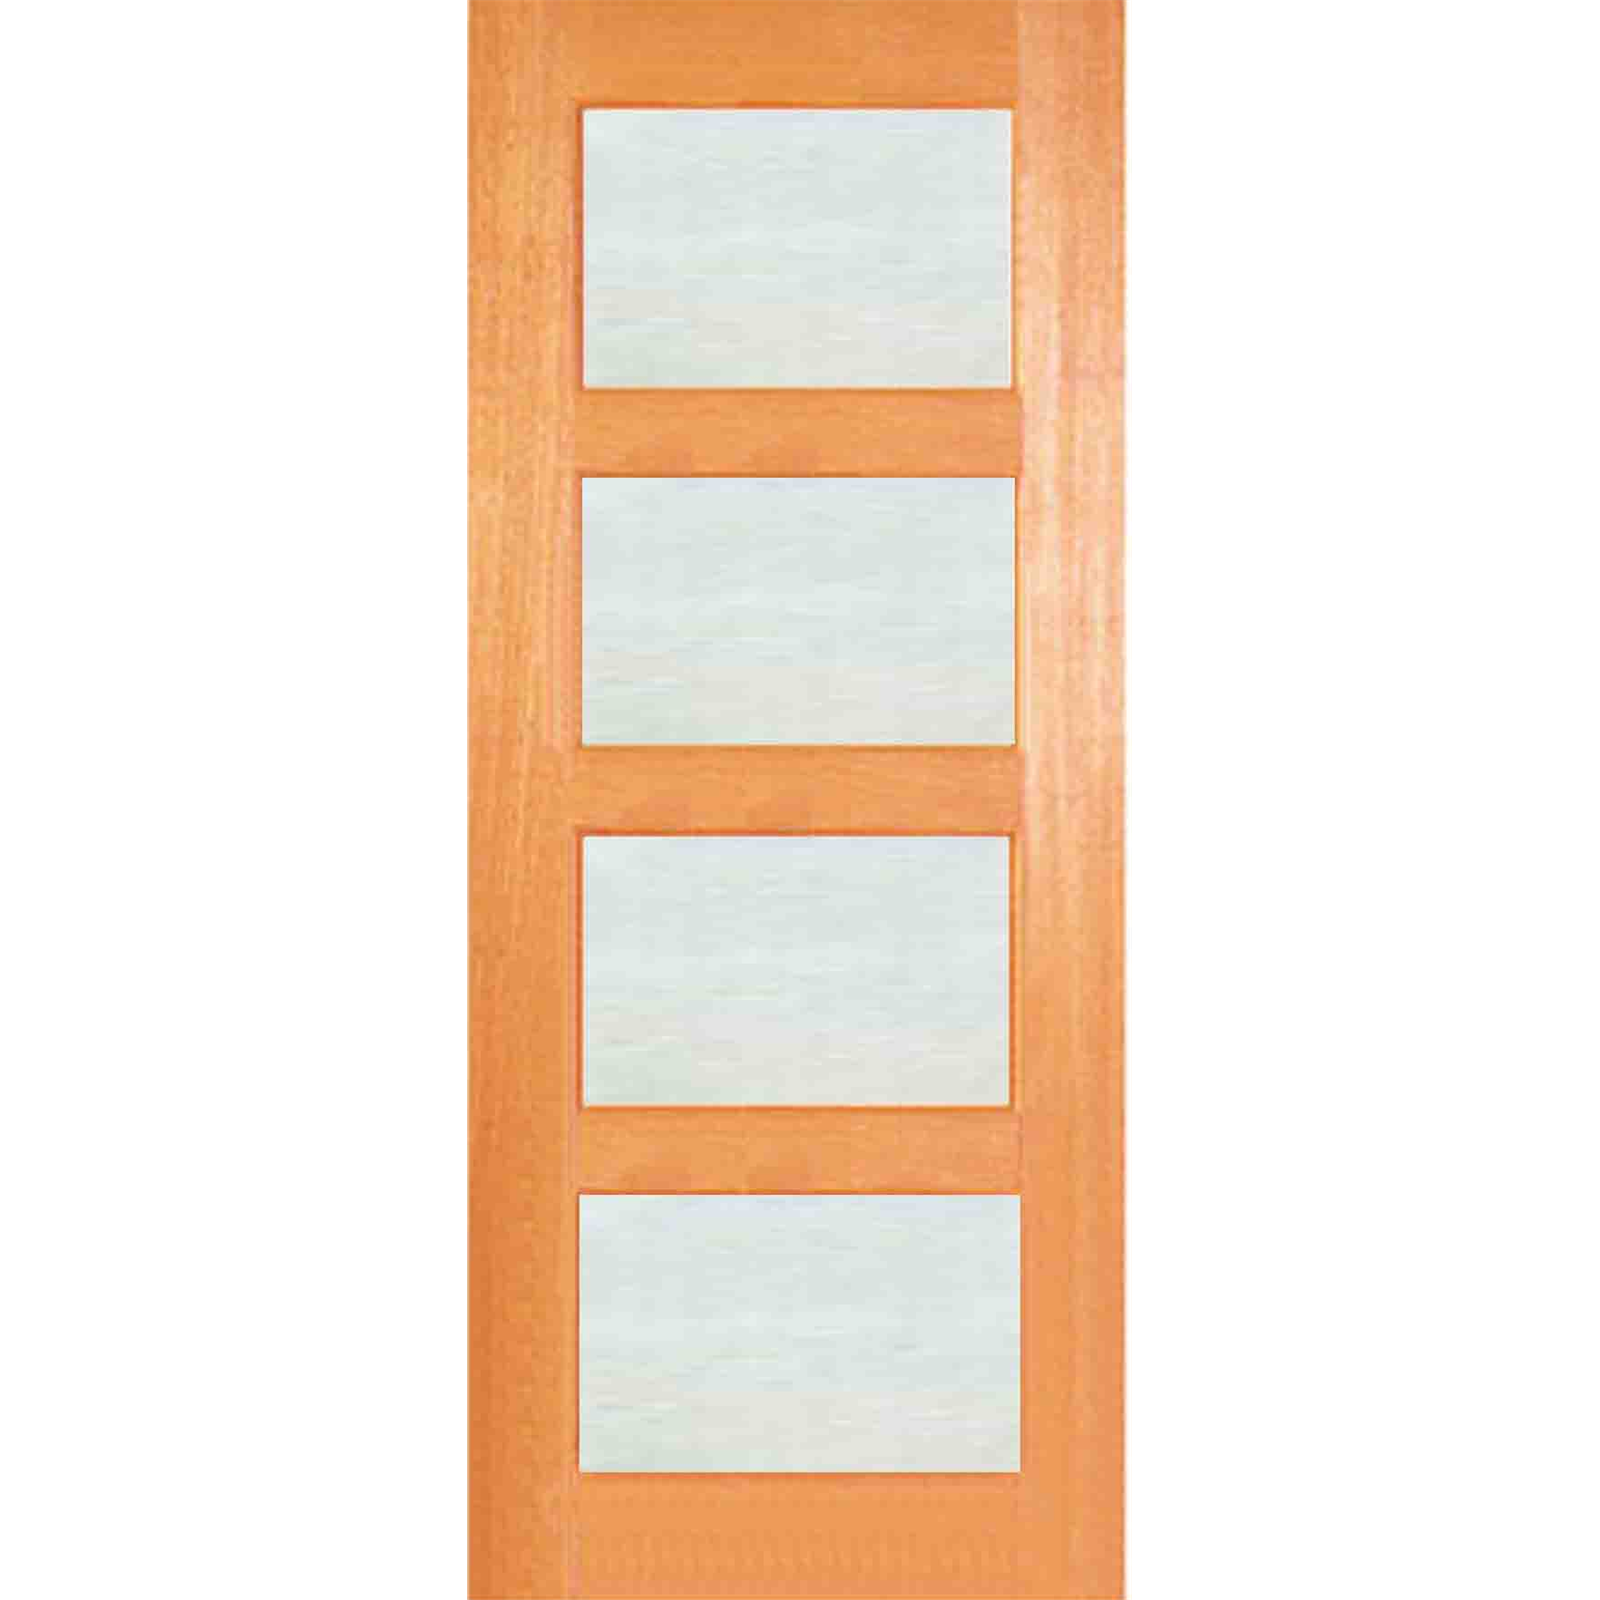 Woodcraft Doors 2040 x 820 x 40mm Frosted Safety Glass Modern French Entrance Door